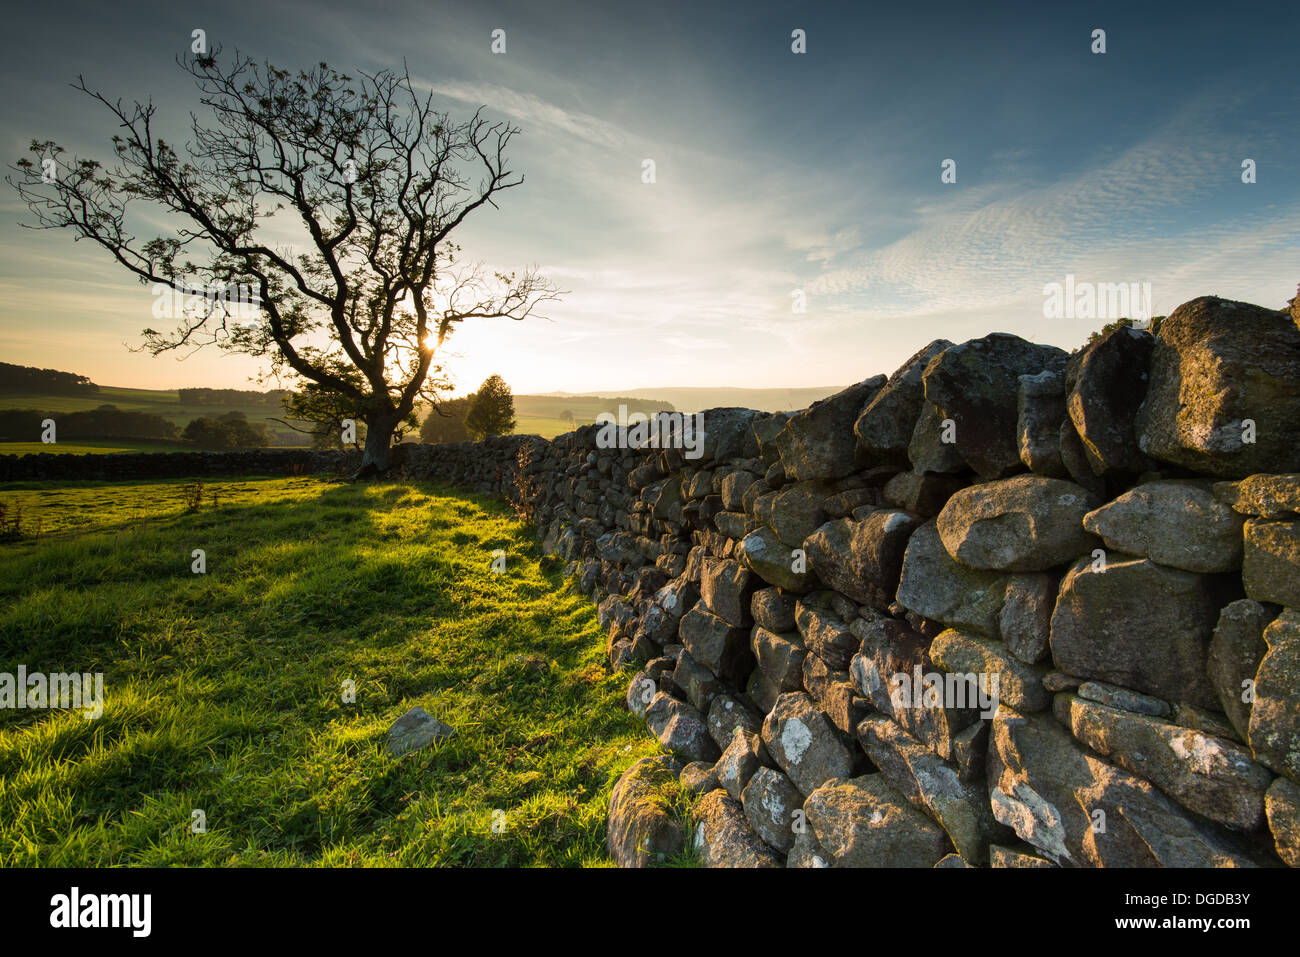 A stone wall leads up to a solitary tree at sunset in Northumberland, England. Stock Photo